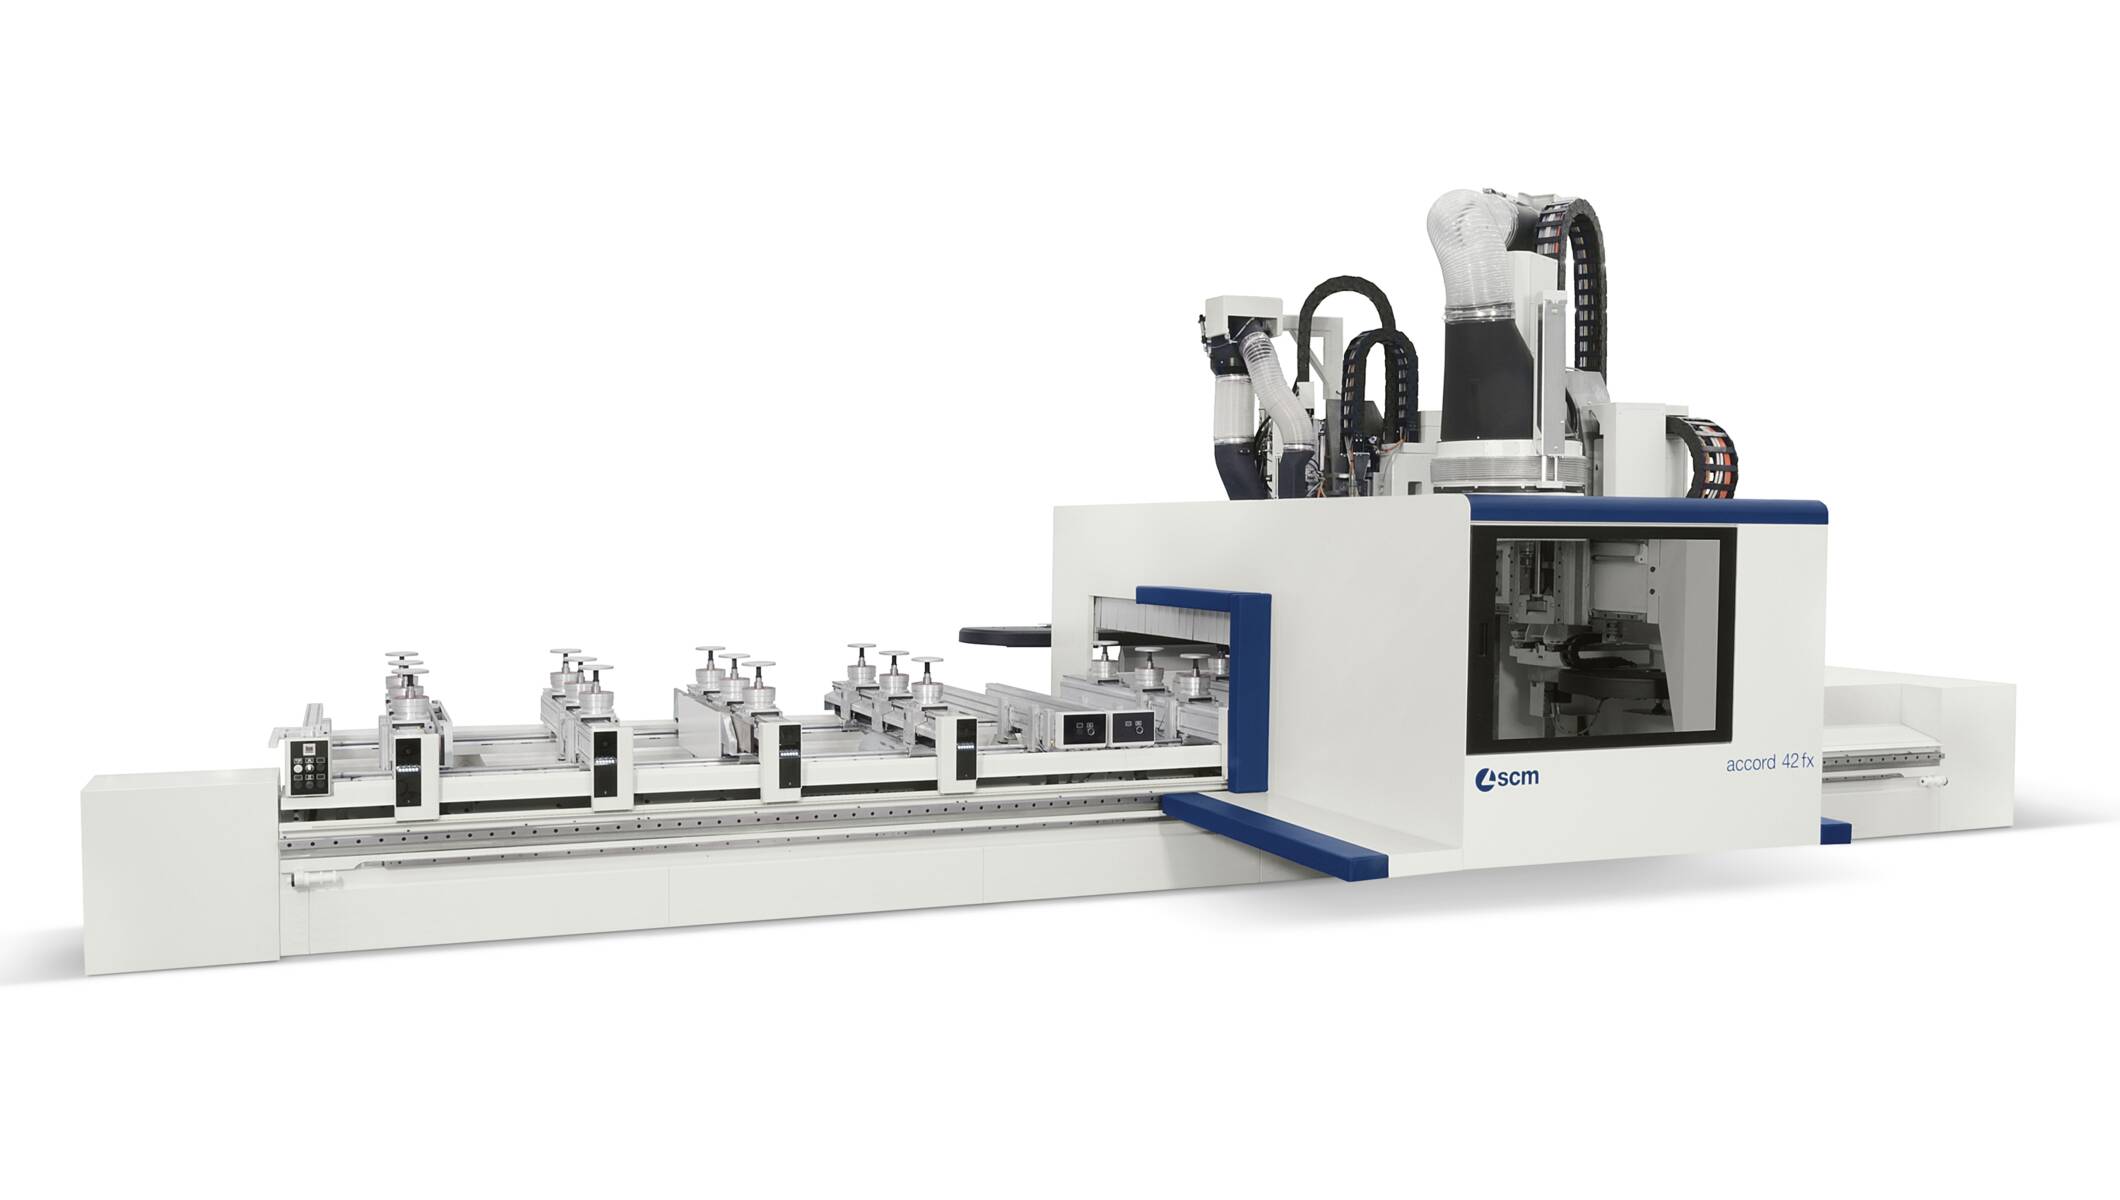 CNC Machining Centres - CNC Machining Centres for routing and drilling - accord 42 fx